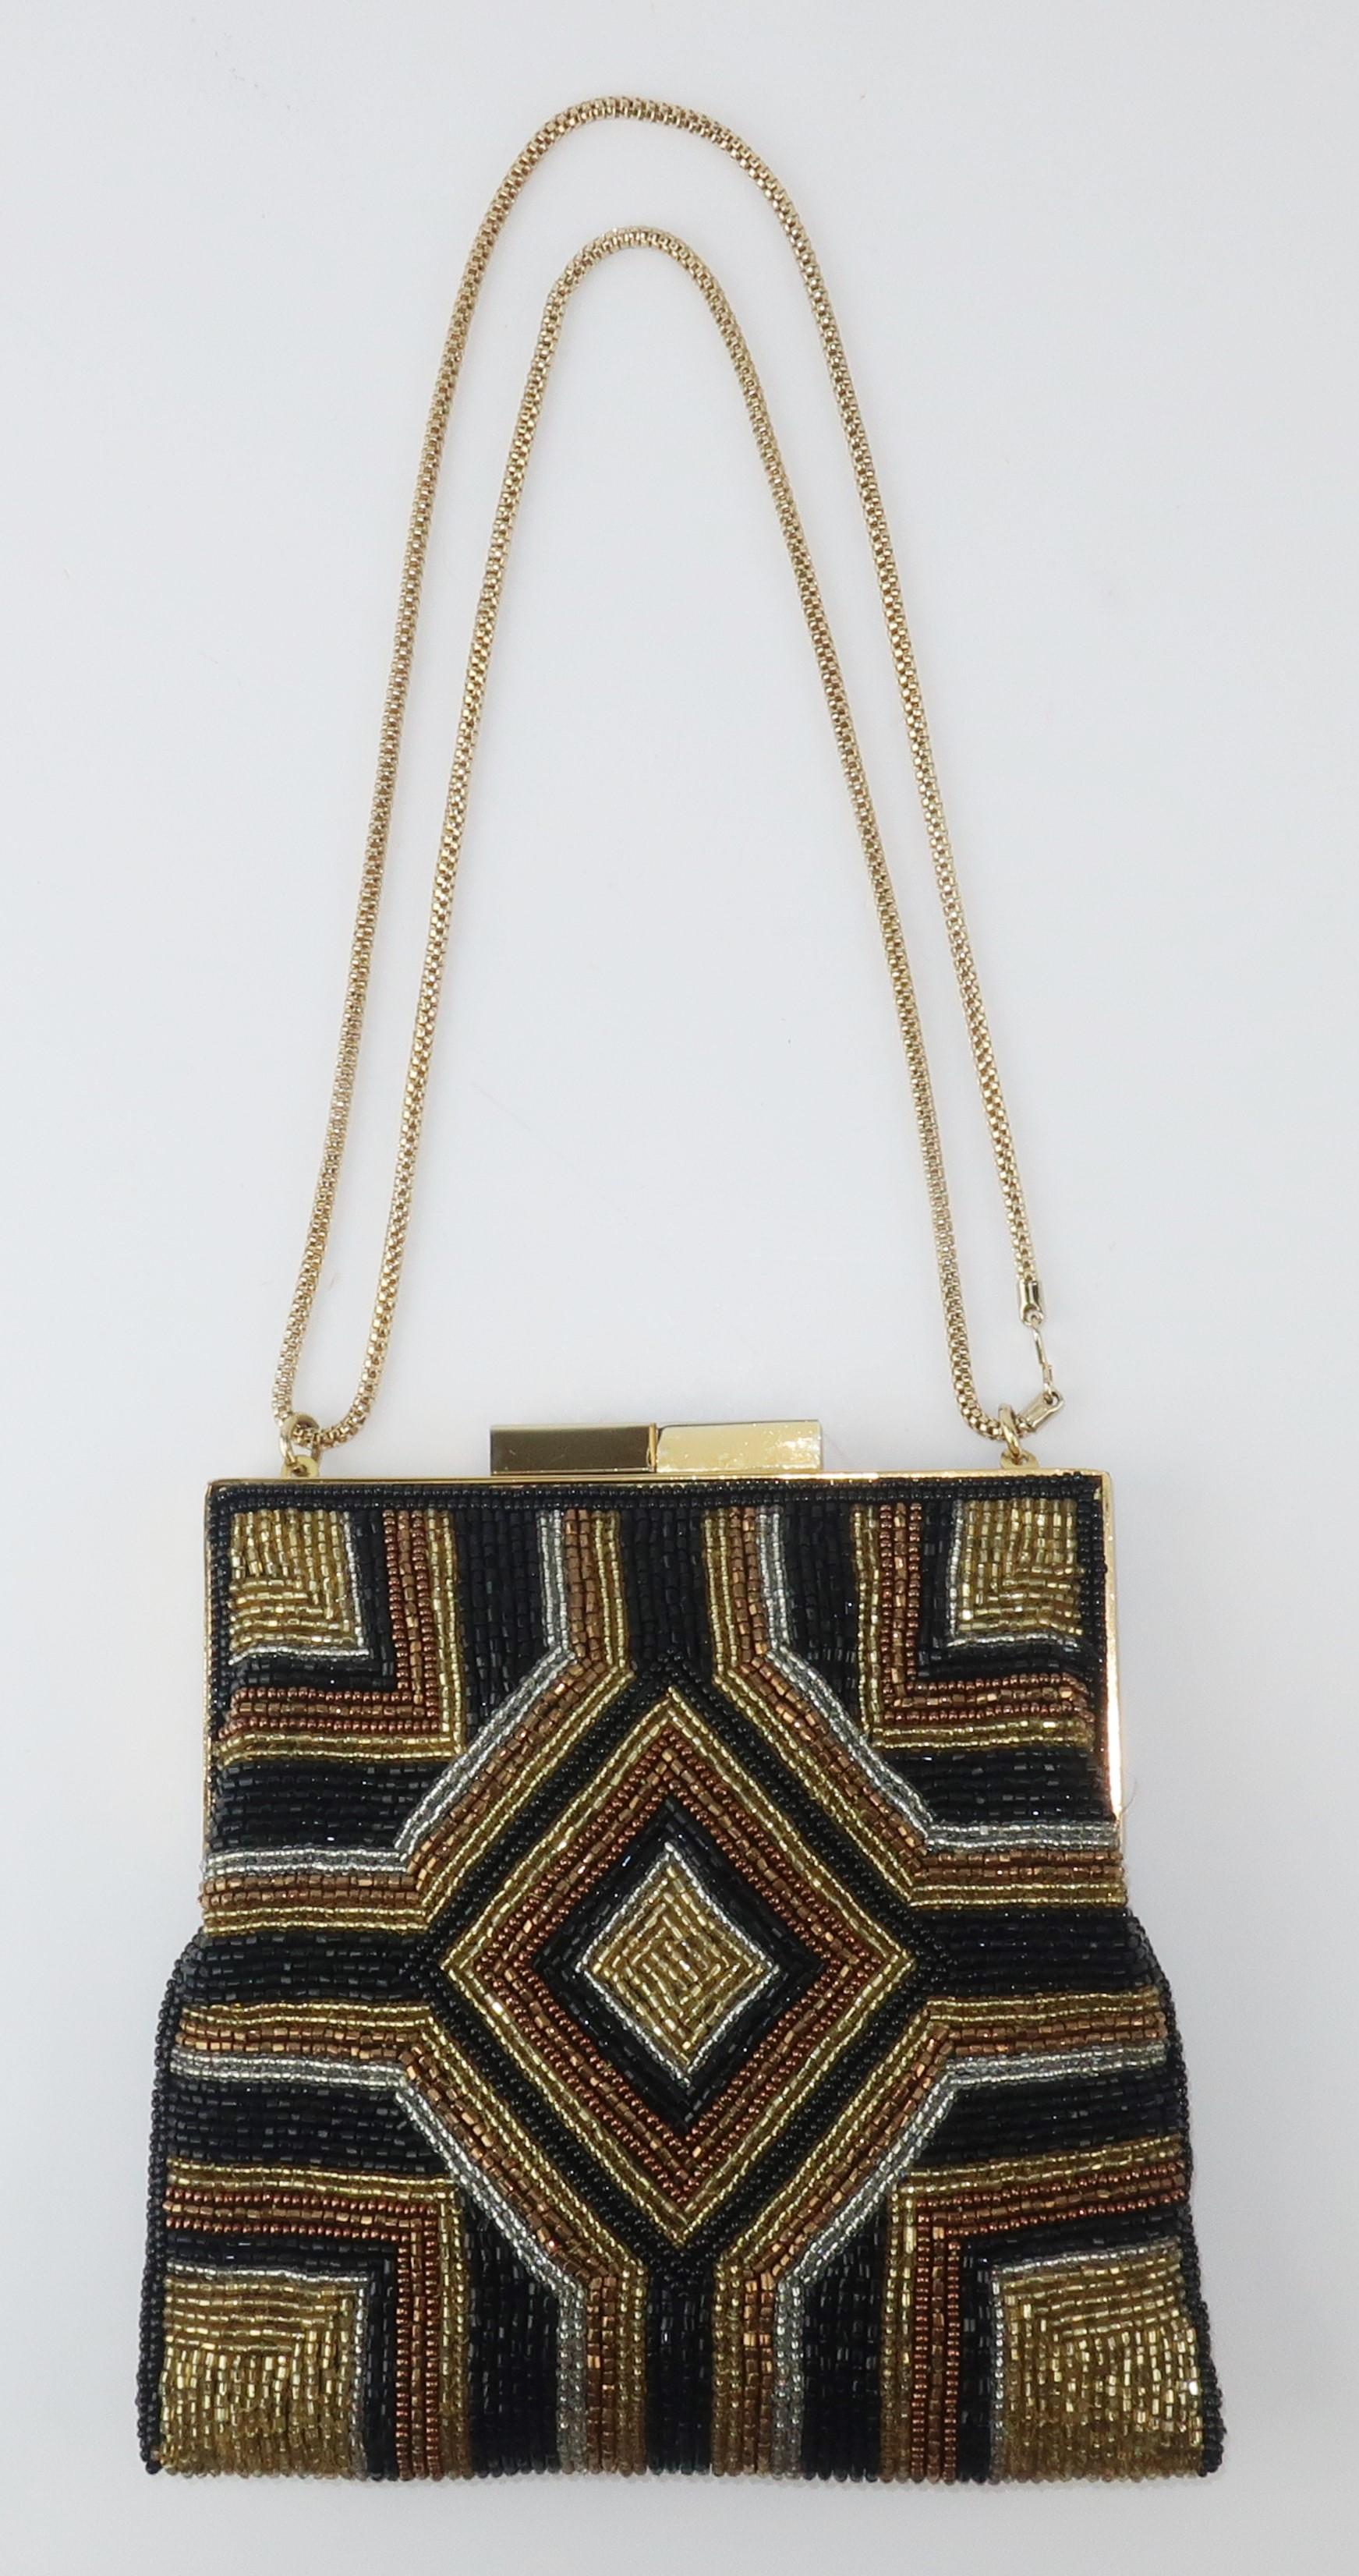 Hilde Walborg founded her company in the 1940's and was always in search of the best handmade beading for her designs.  This glamorous evening handbag combines an art deco aesthetic with a disco vibe all in an intricate pattern of gold, bronze and